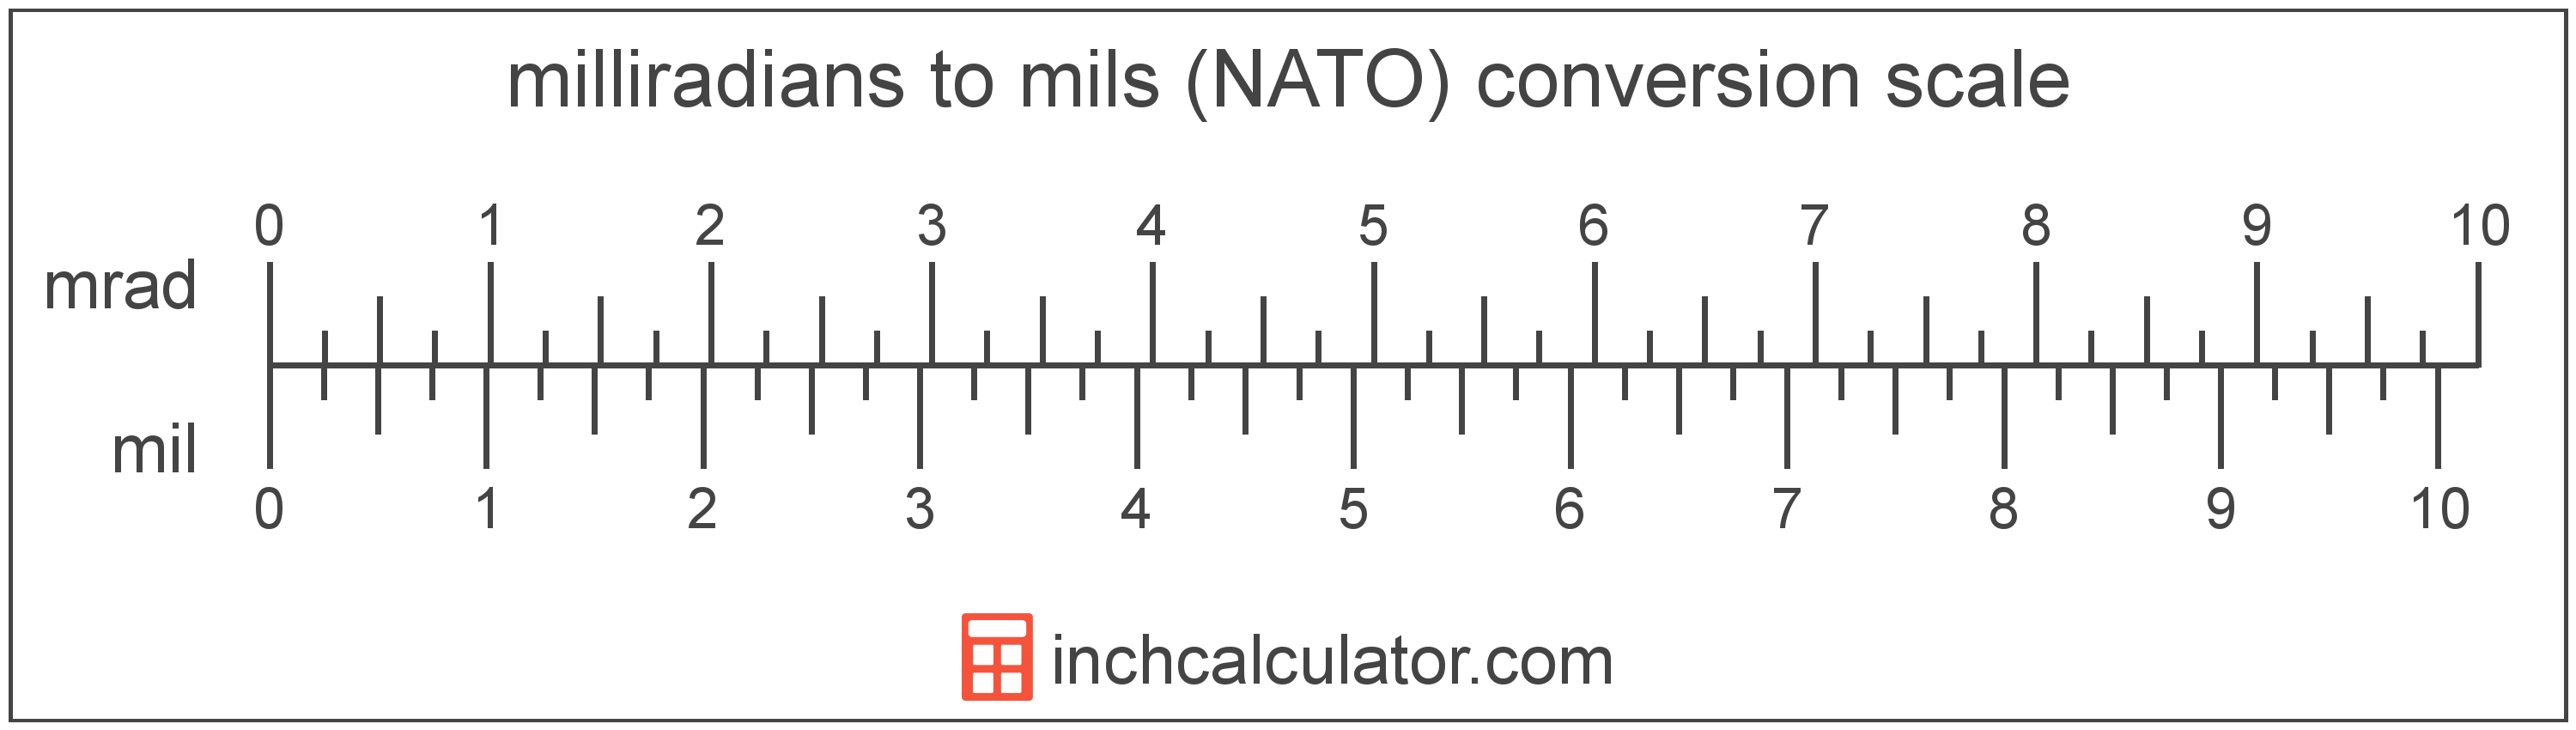 conversion scale showing mils and equivalent milliradians angle values